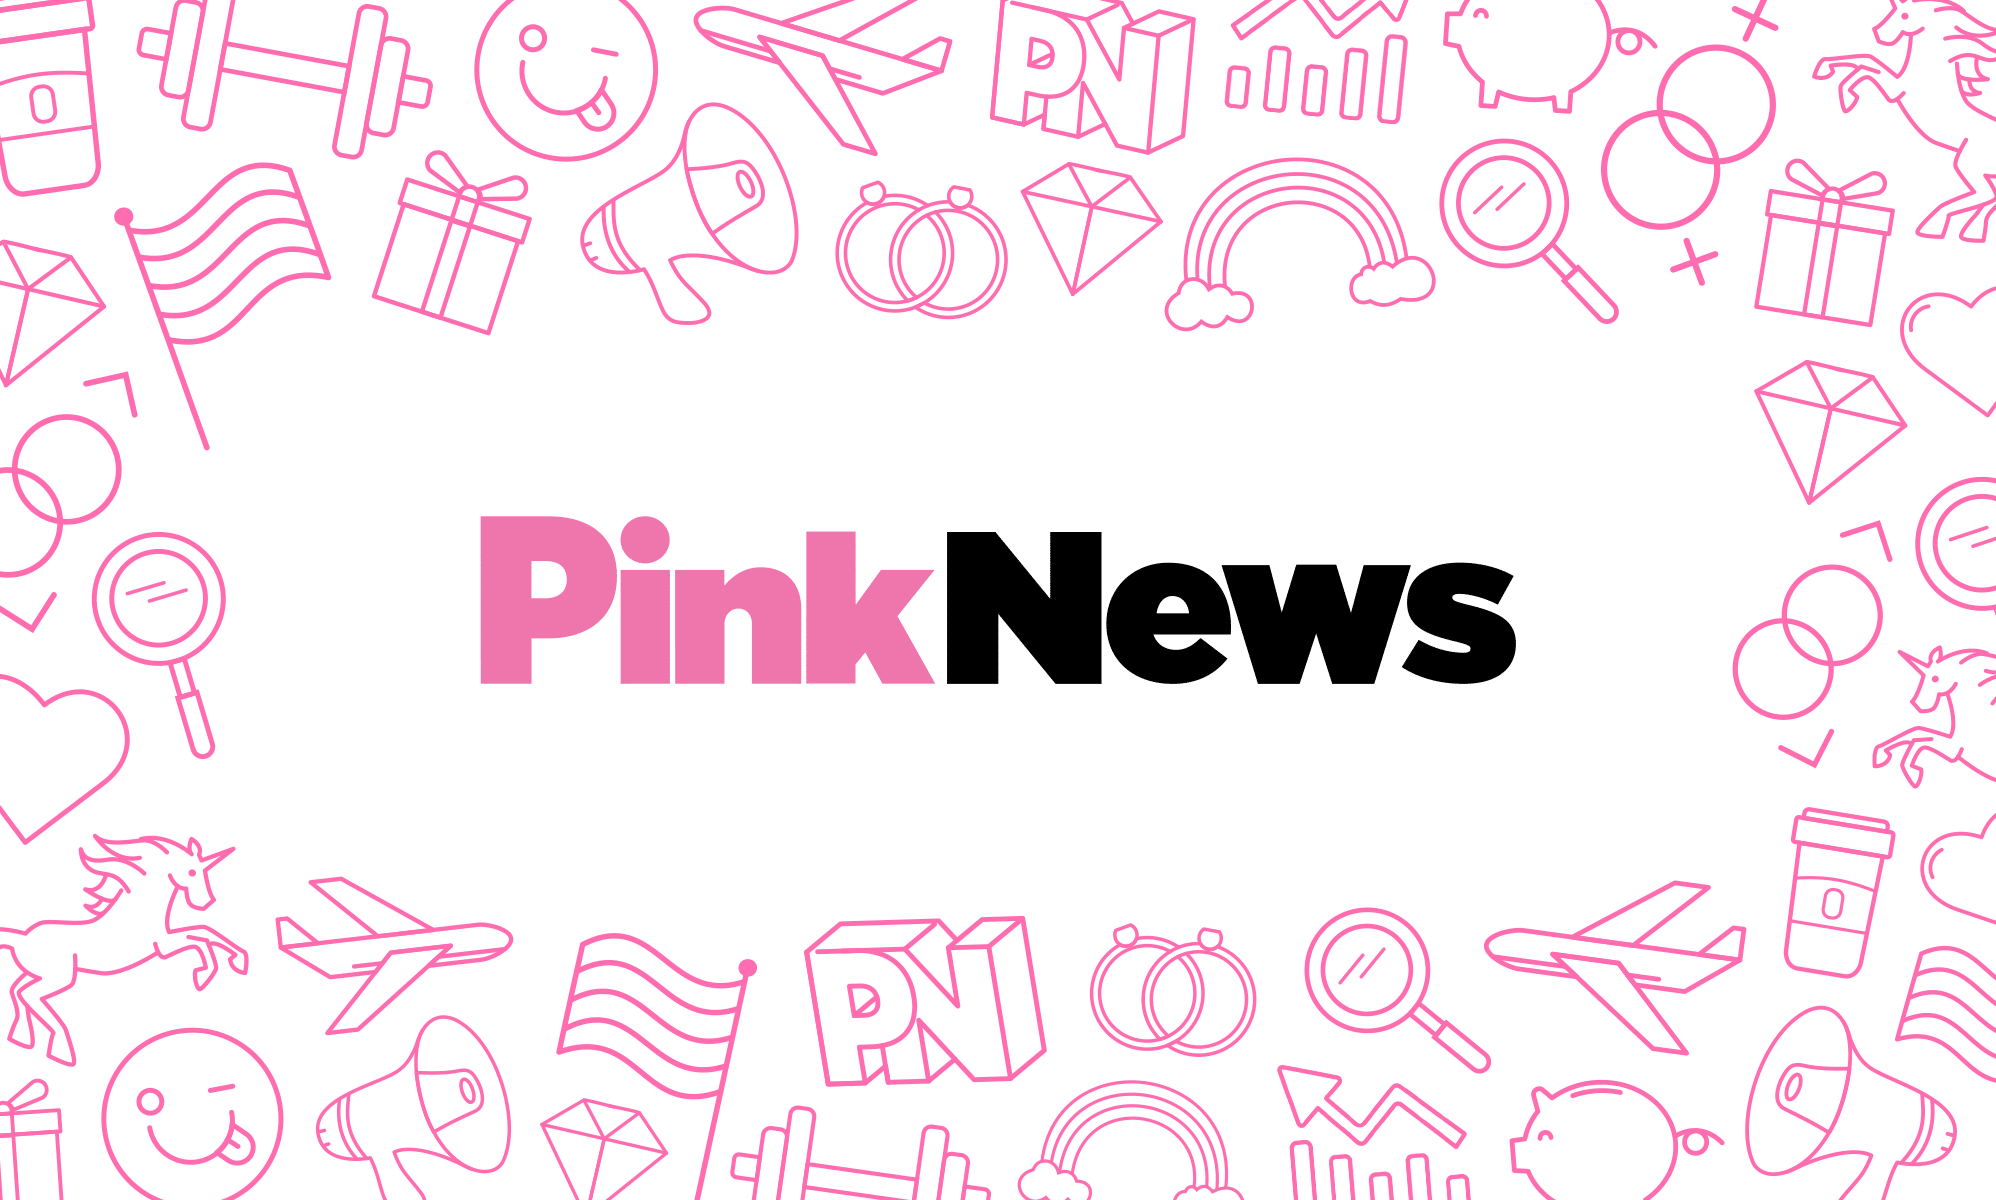 David Mundell tells PinkNews Awards: Coming out has made me so much happier